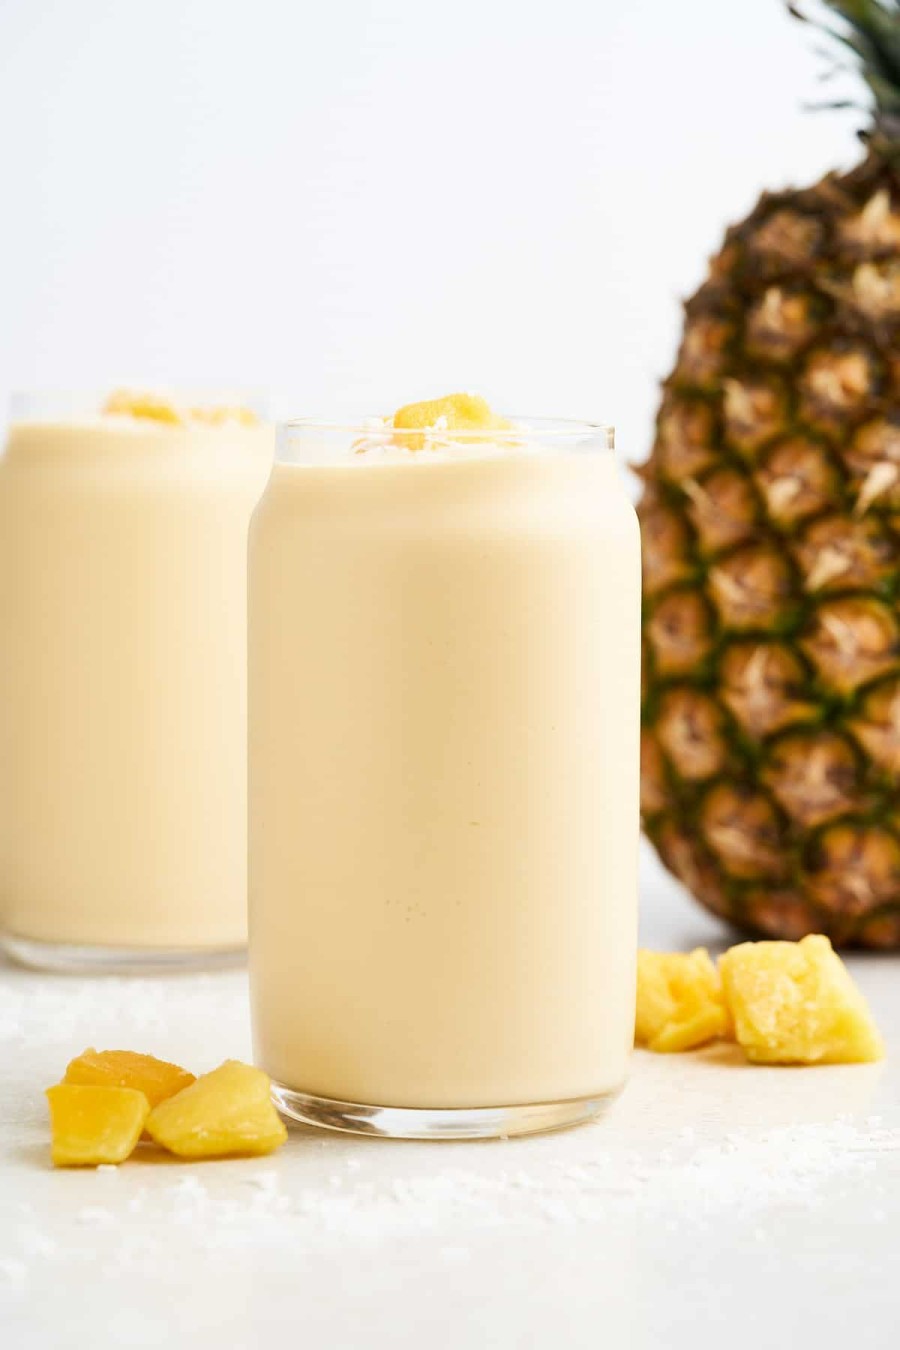 a (not local) pineapple & mango smoothie